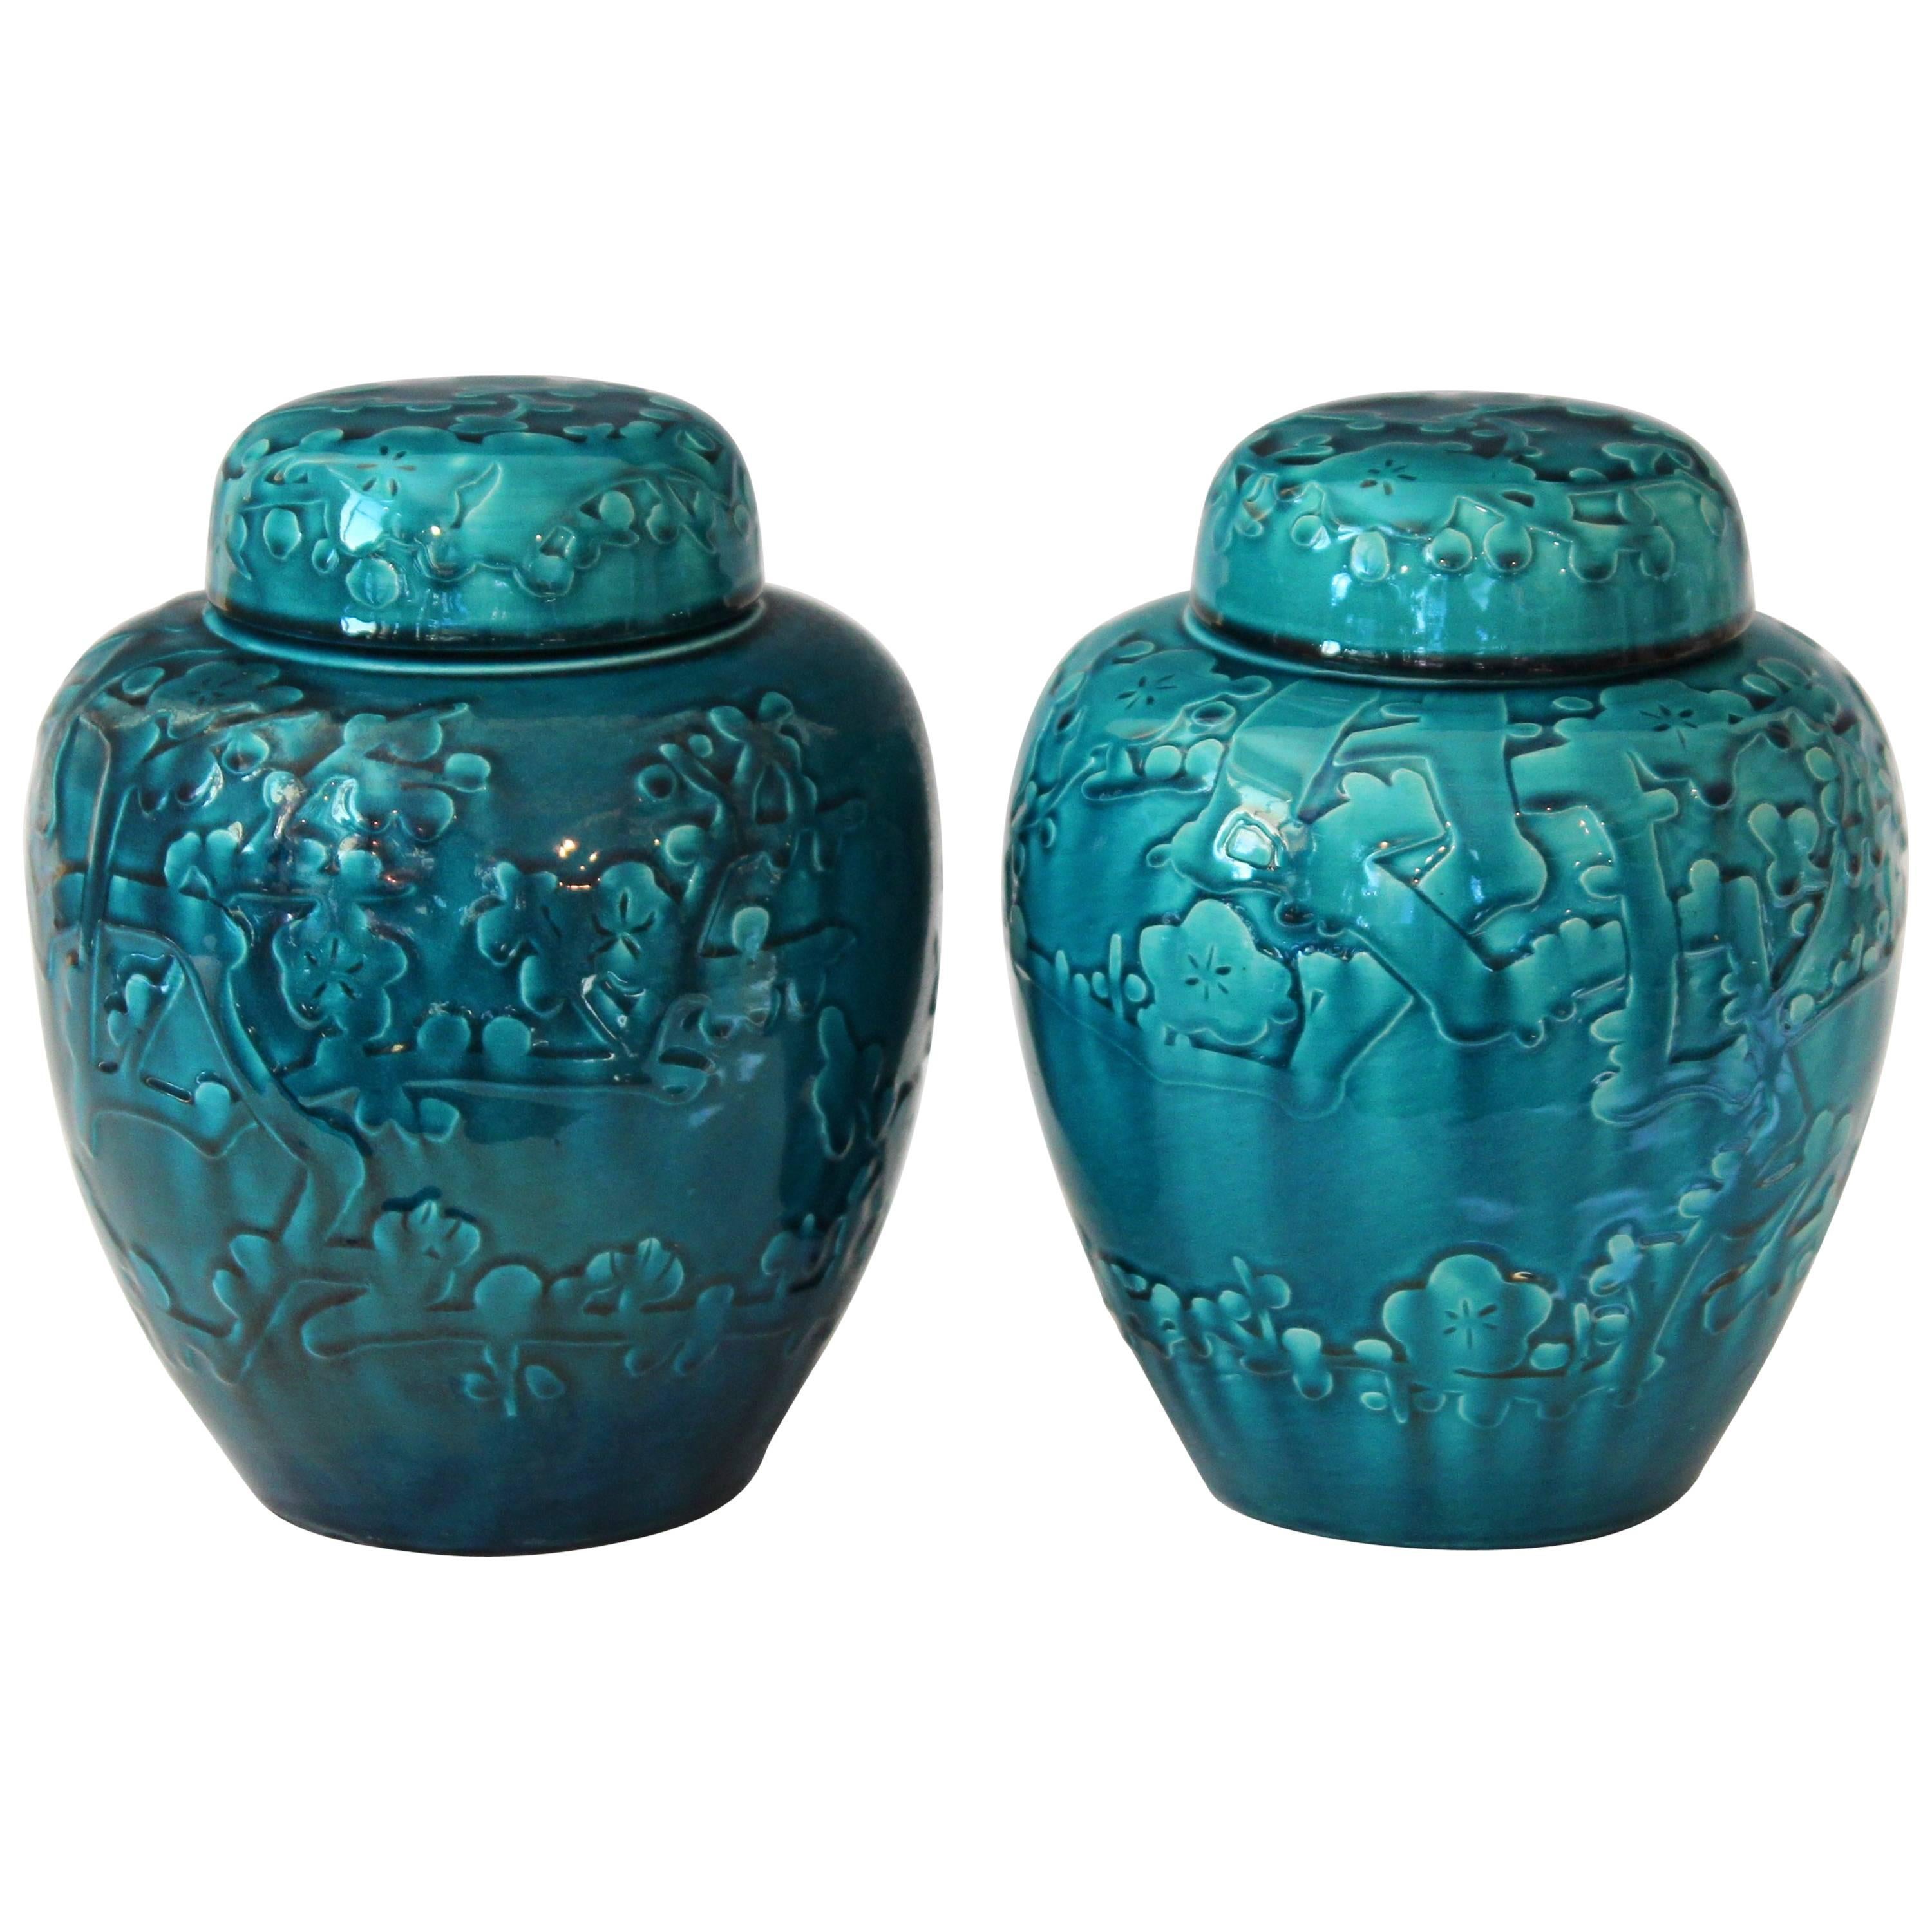 Pair of Turquoise Awaji Pottery Ginger Jars, Covers Applied and Incised Prunus